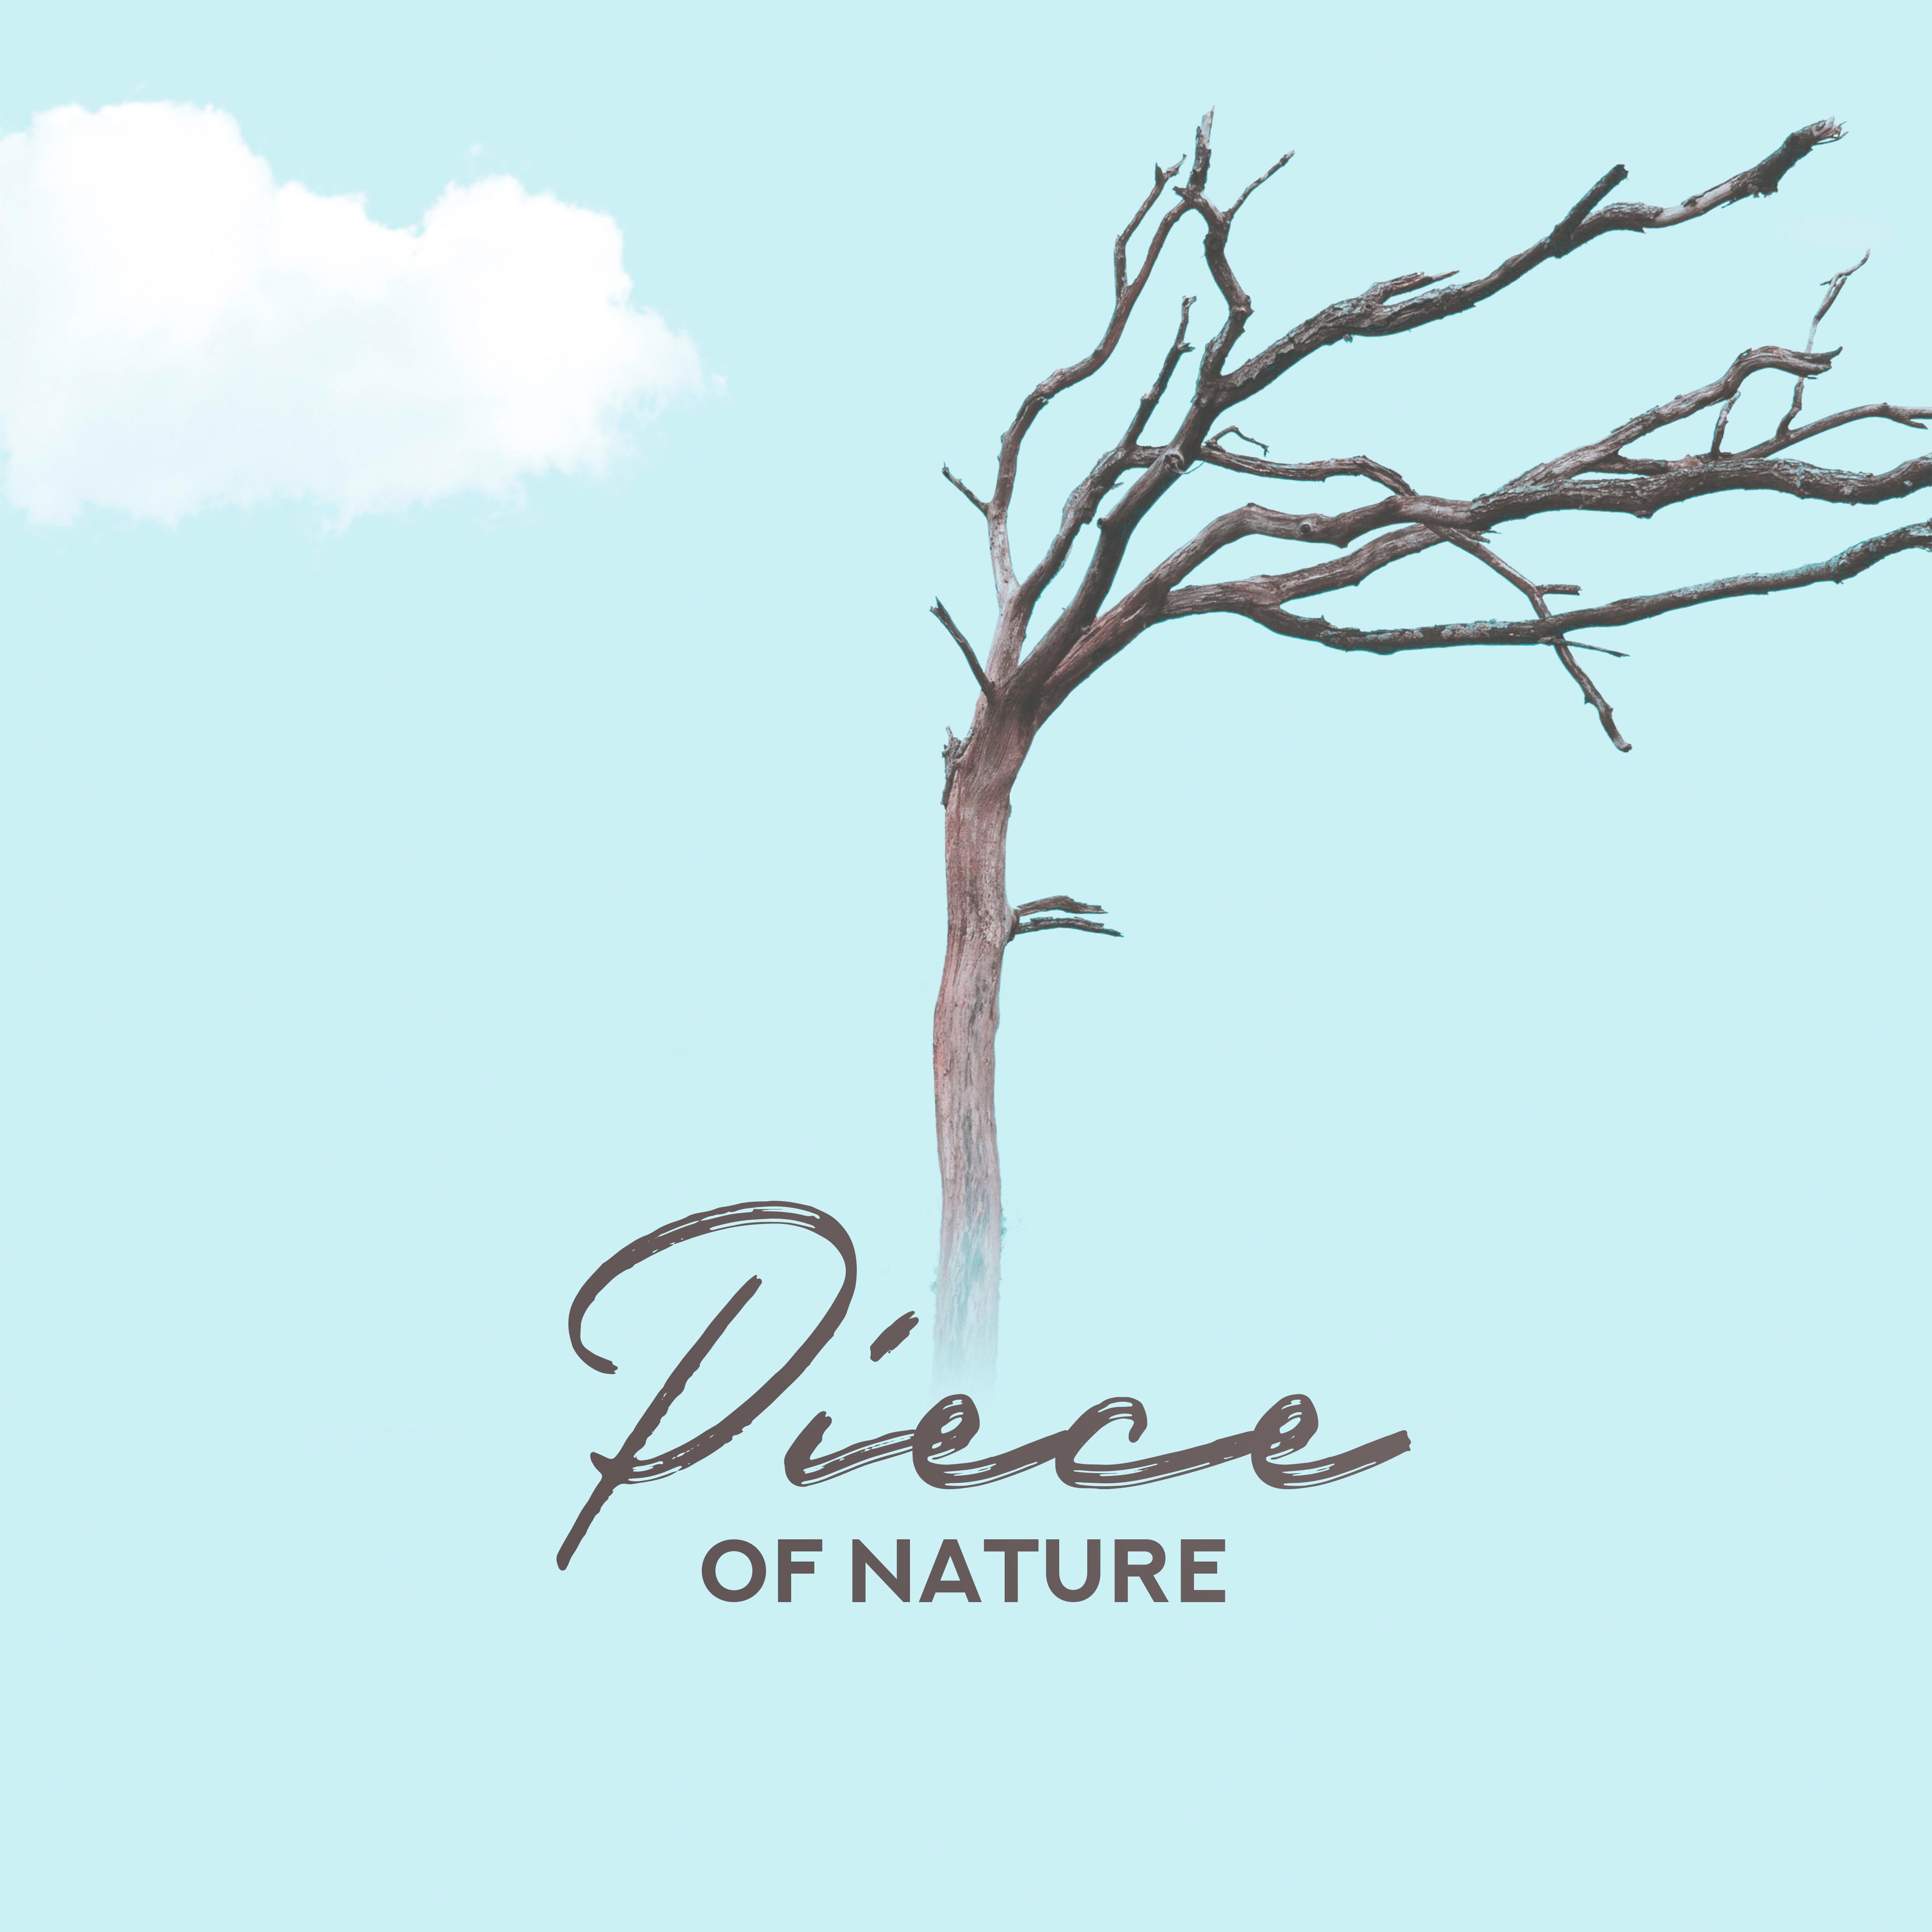 Piece of Nature  15 Nature Sounds, Nature Music for Sleep, Meditation, Yoga Training, Relaxation, Zen Lounge